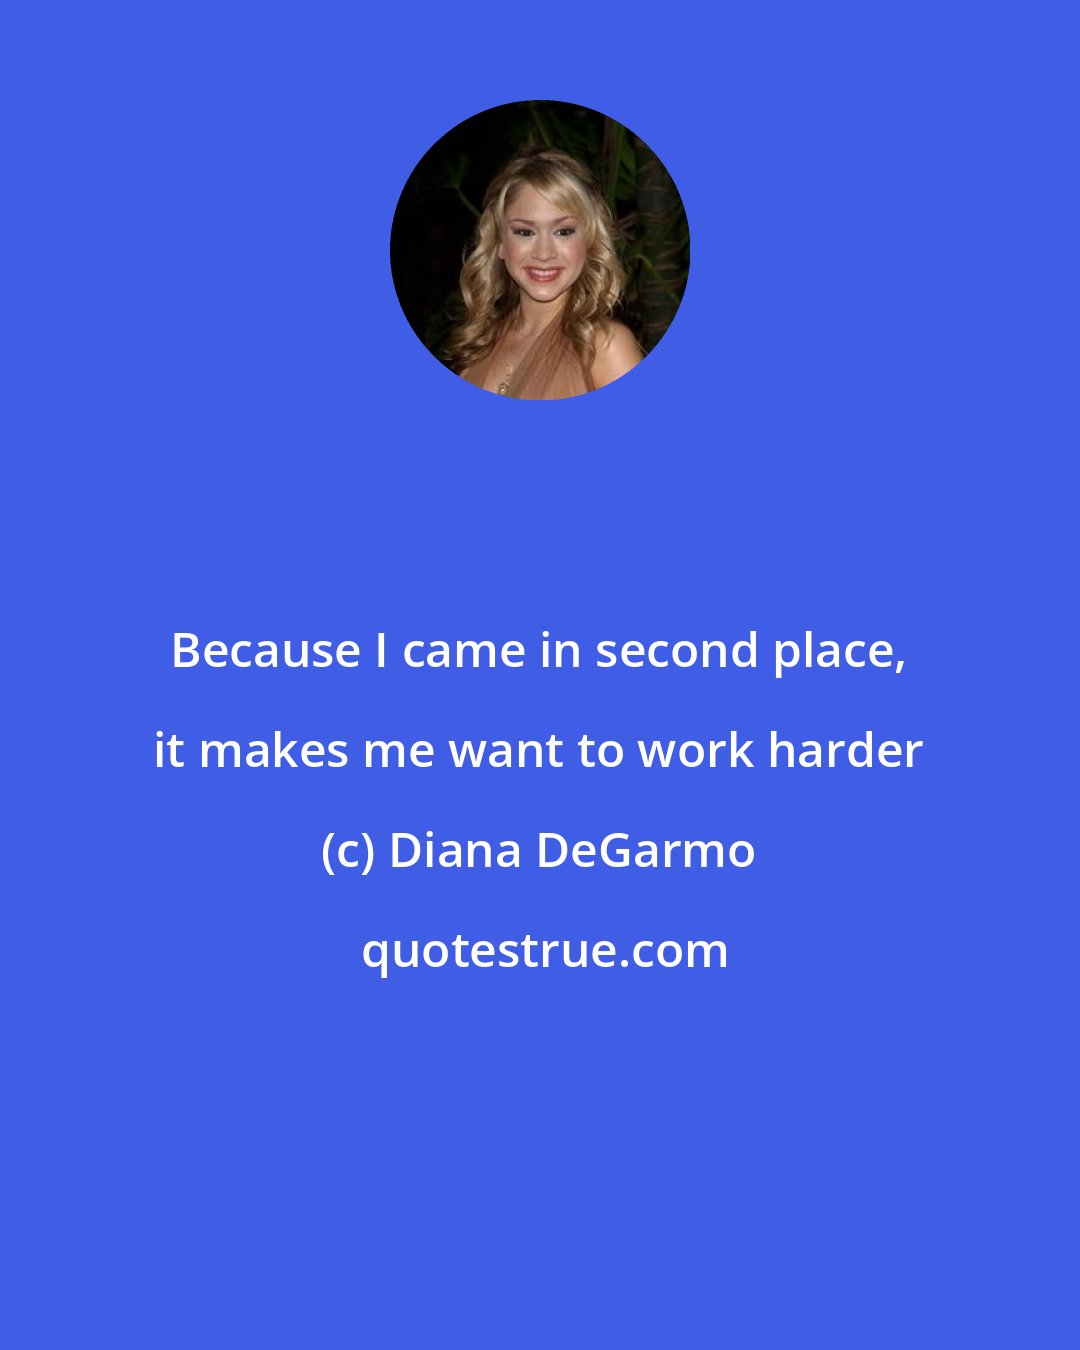 Diana DeGarmo: Because I came in second place, it makes me want to work harder